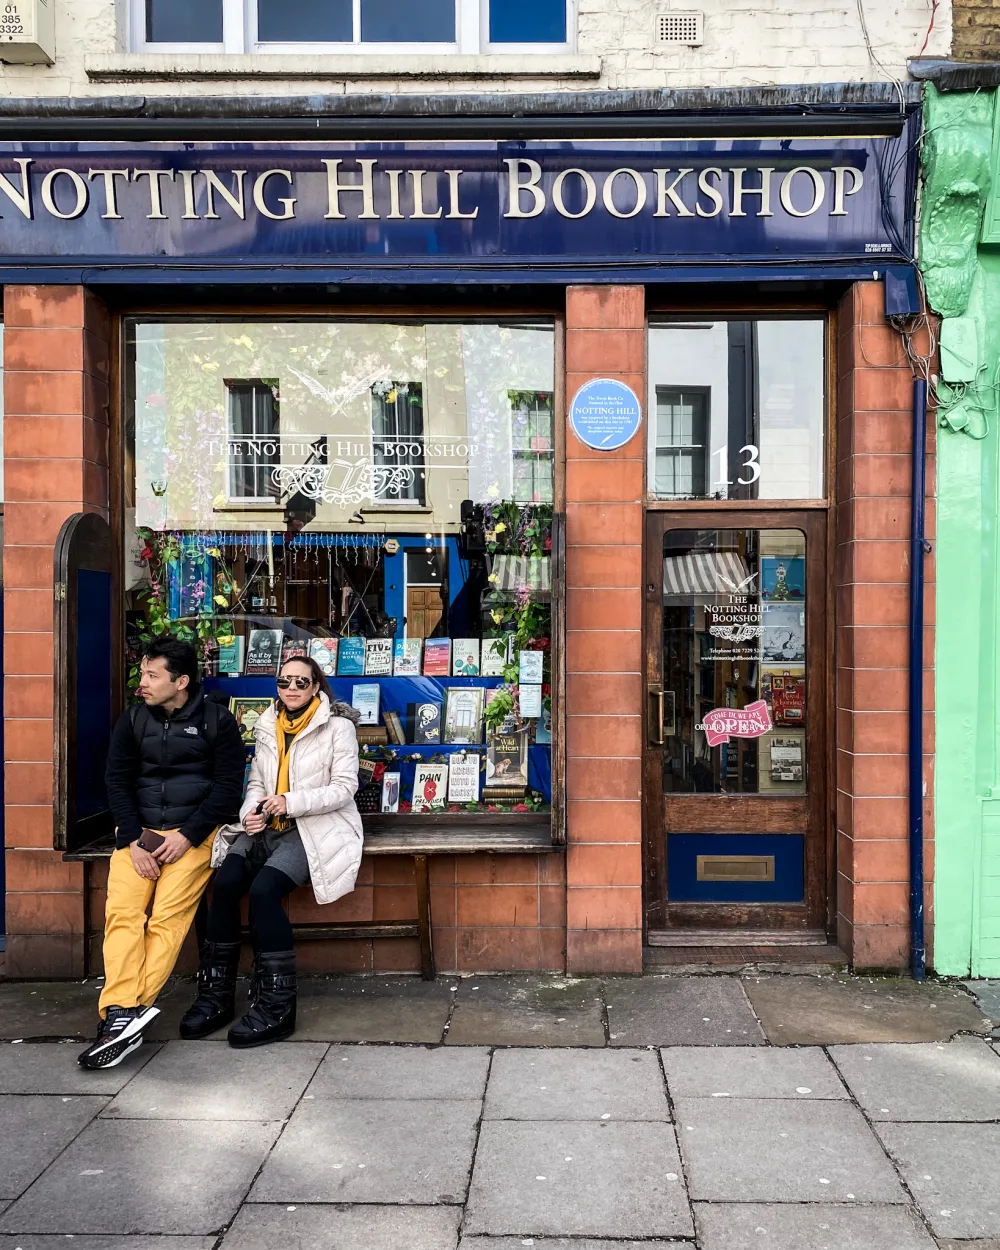 A Visit to Notting Hill Travel Bookshop: Everything You Need to